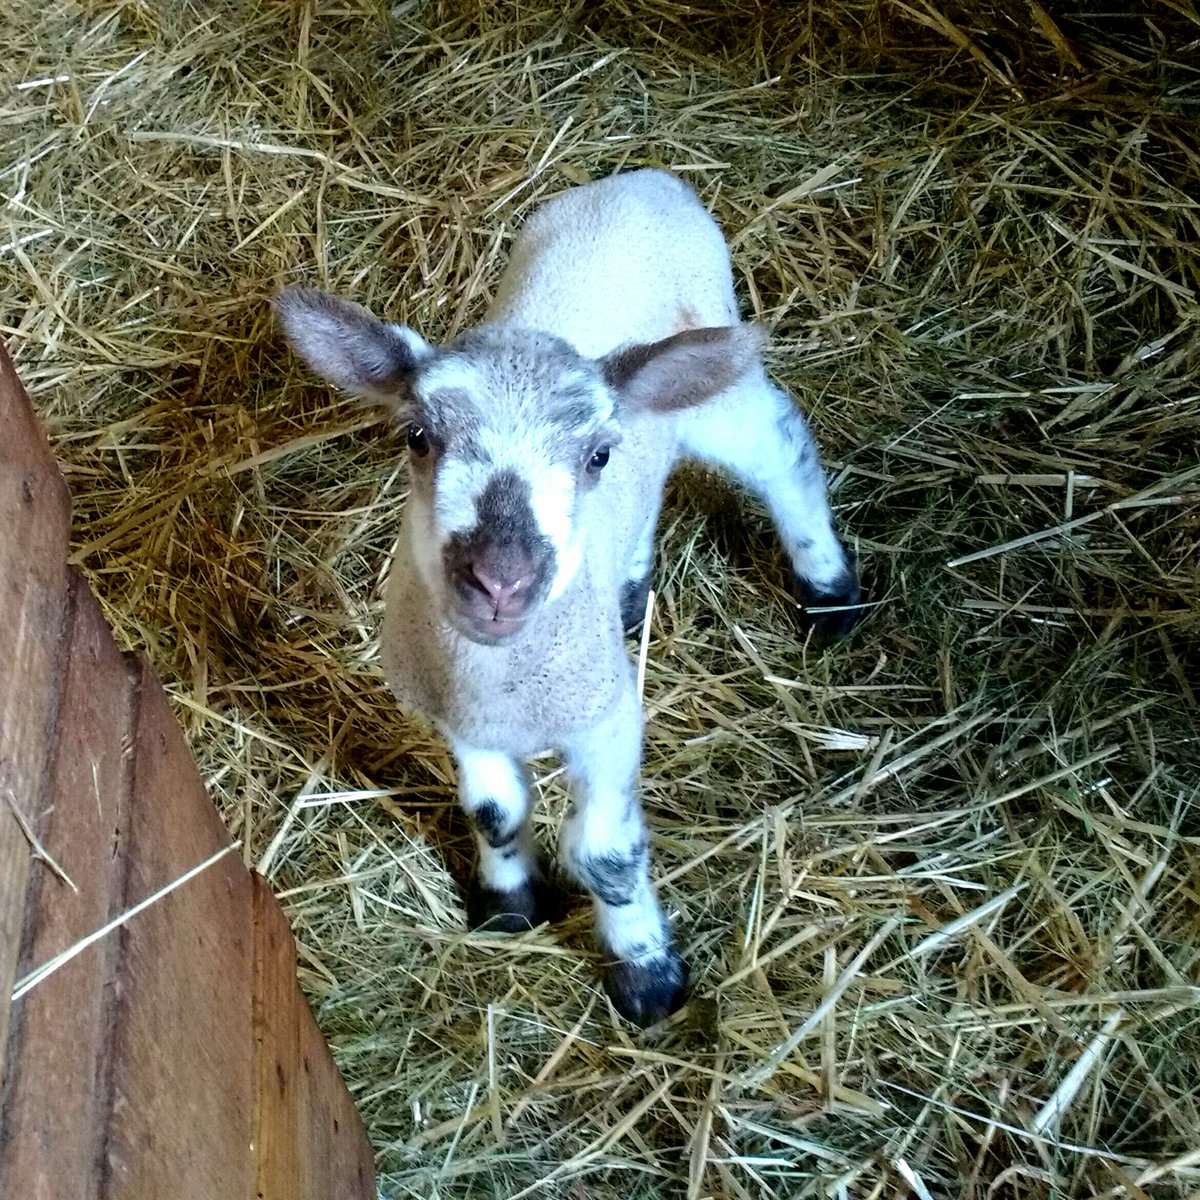 Hello folks! Just a smiley face to cheer you all up today! #sheep #lambs #smallholding #onthefarm